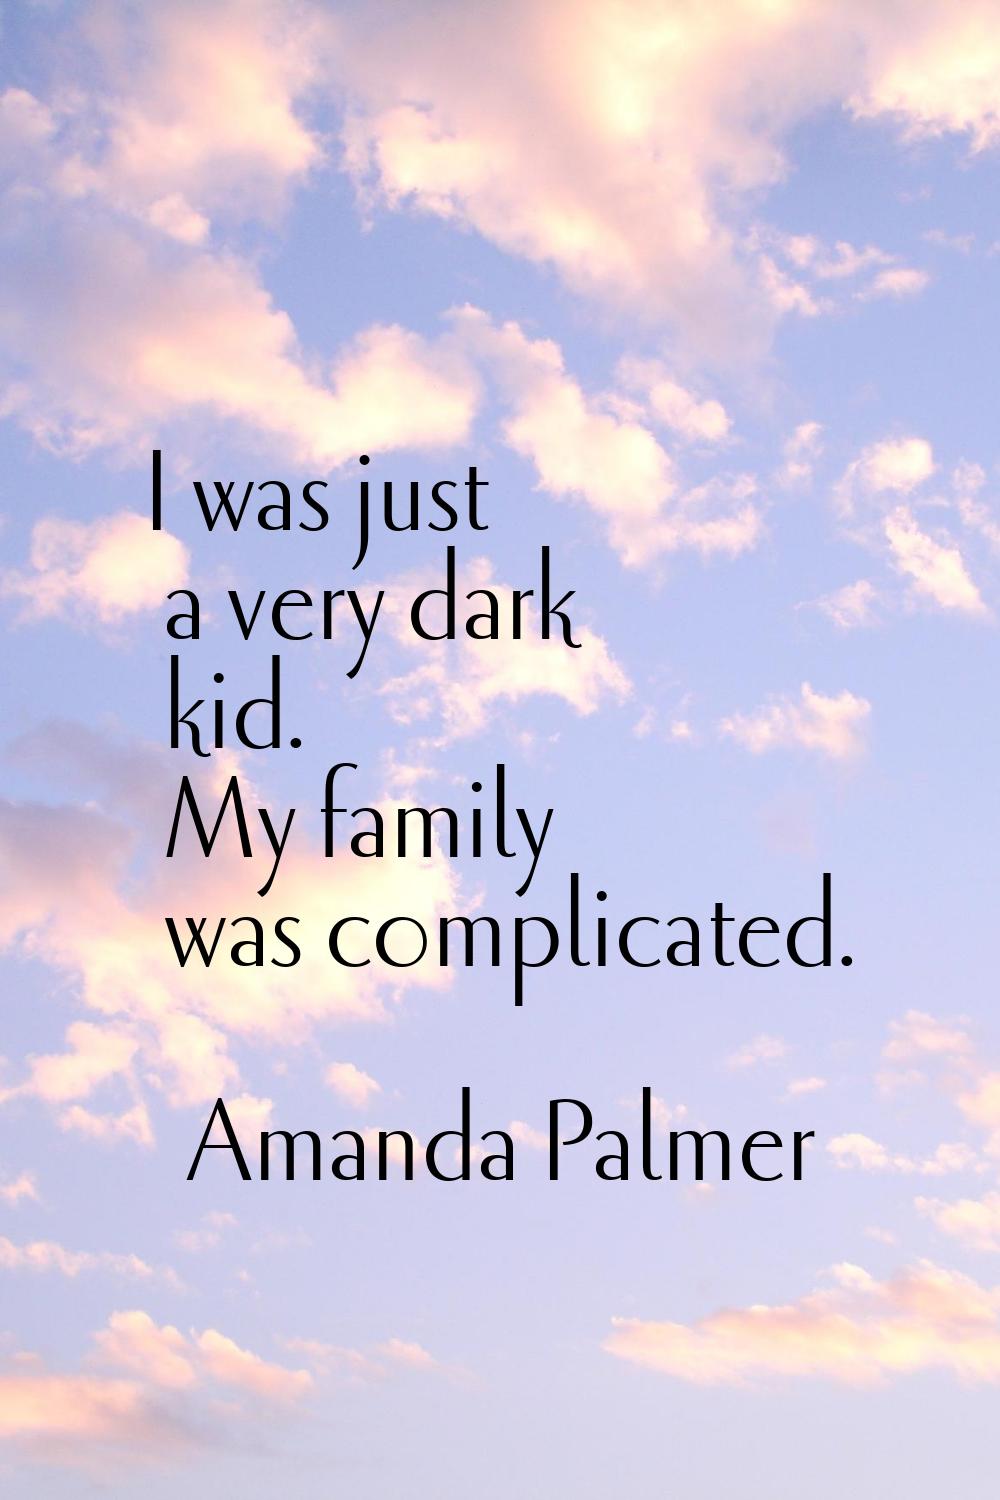 I was just a very dark kid. My family was complicated.